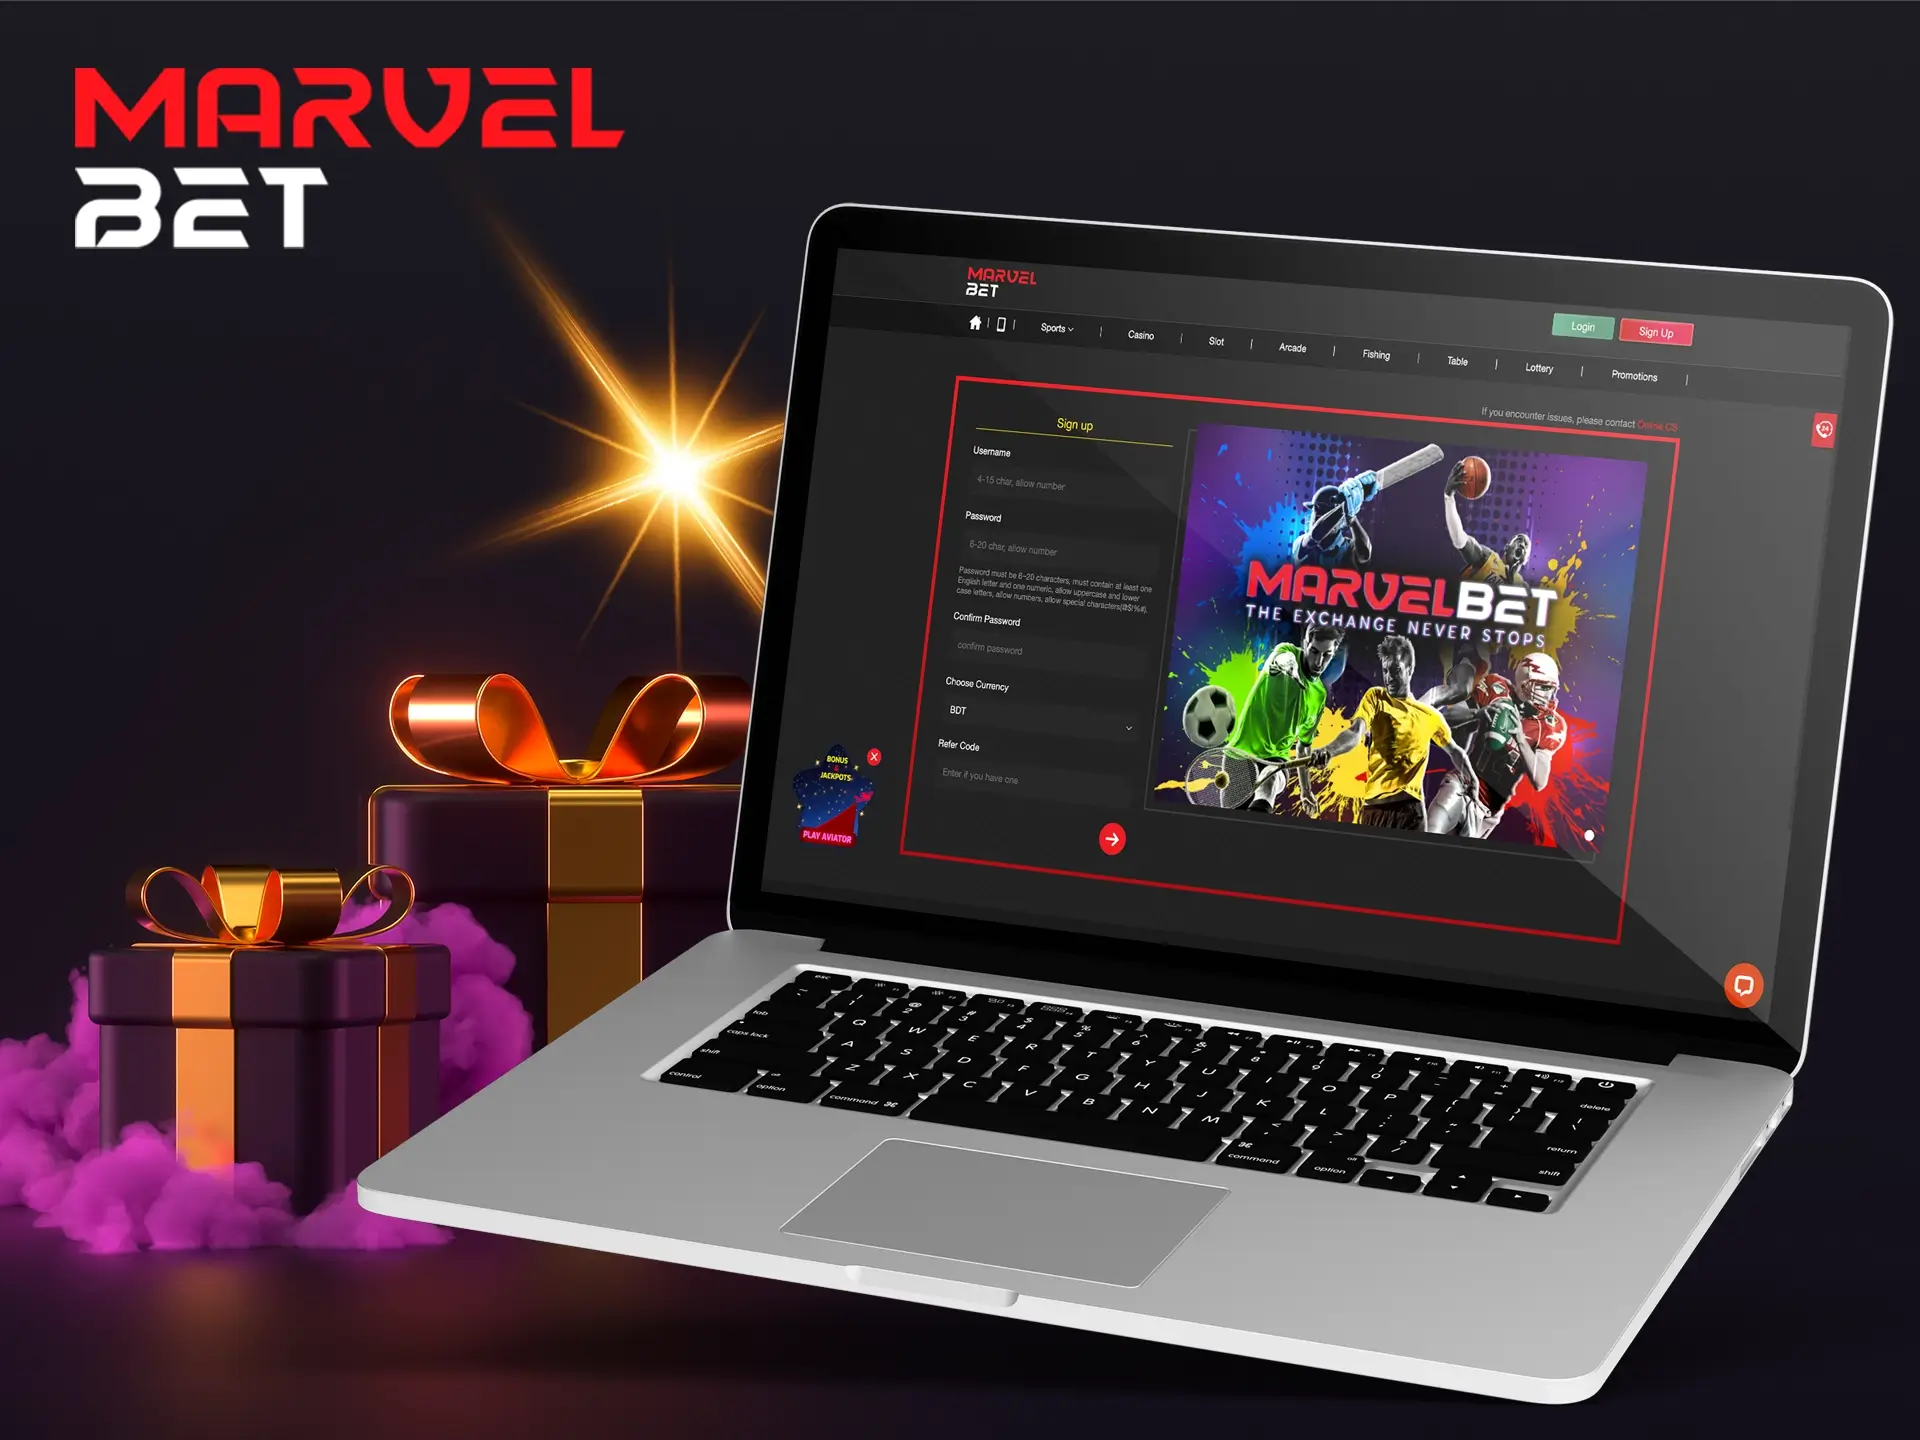 Just a few clicks and you're already the owner of an awesome bonus from Marvelbet.